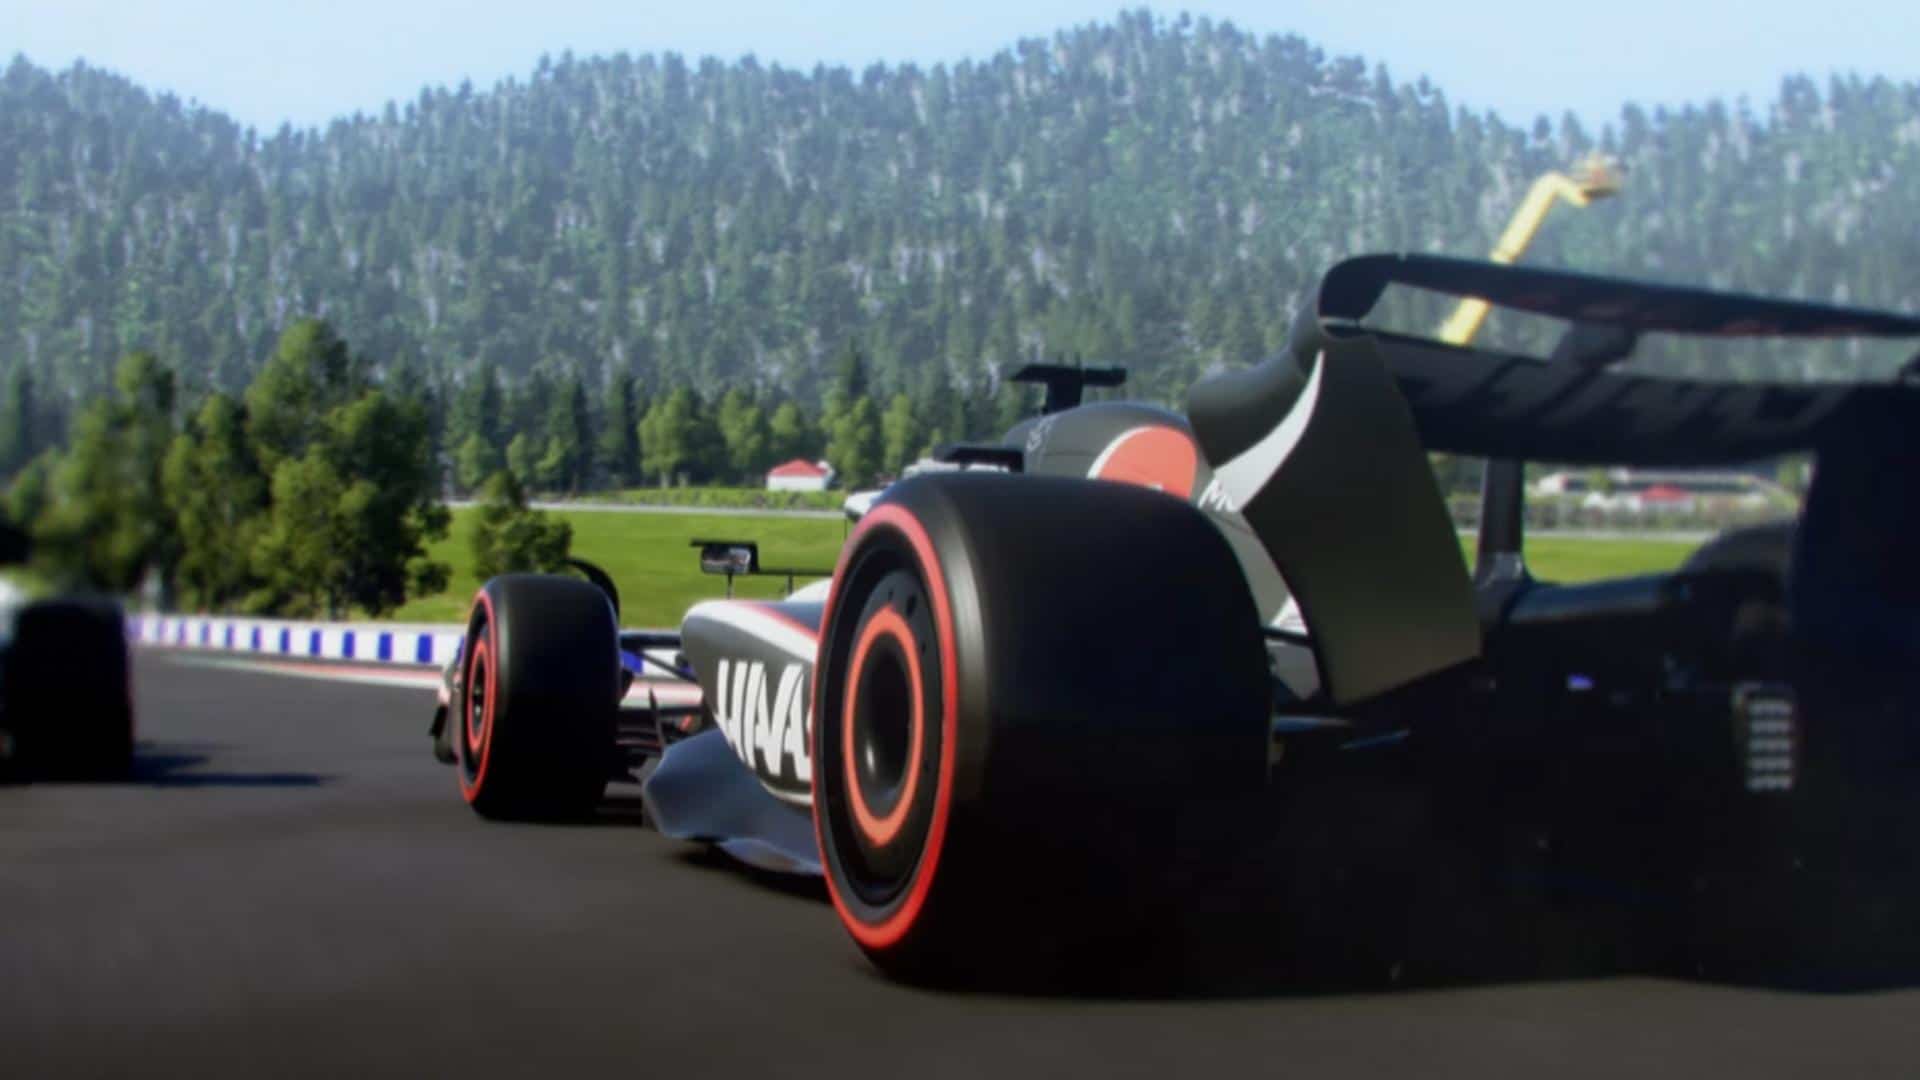 F1 23 game cross-play and dual entitlement details